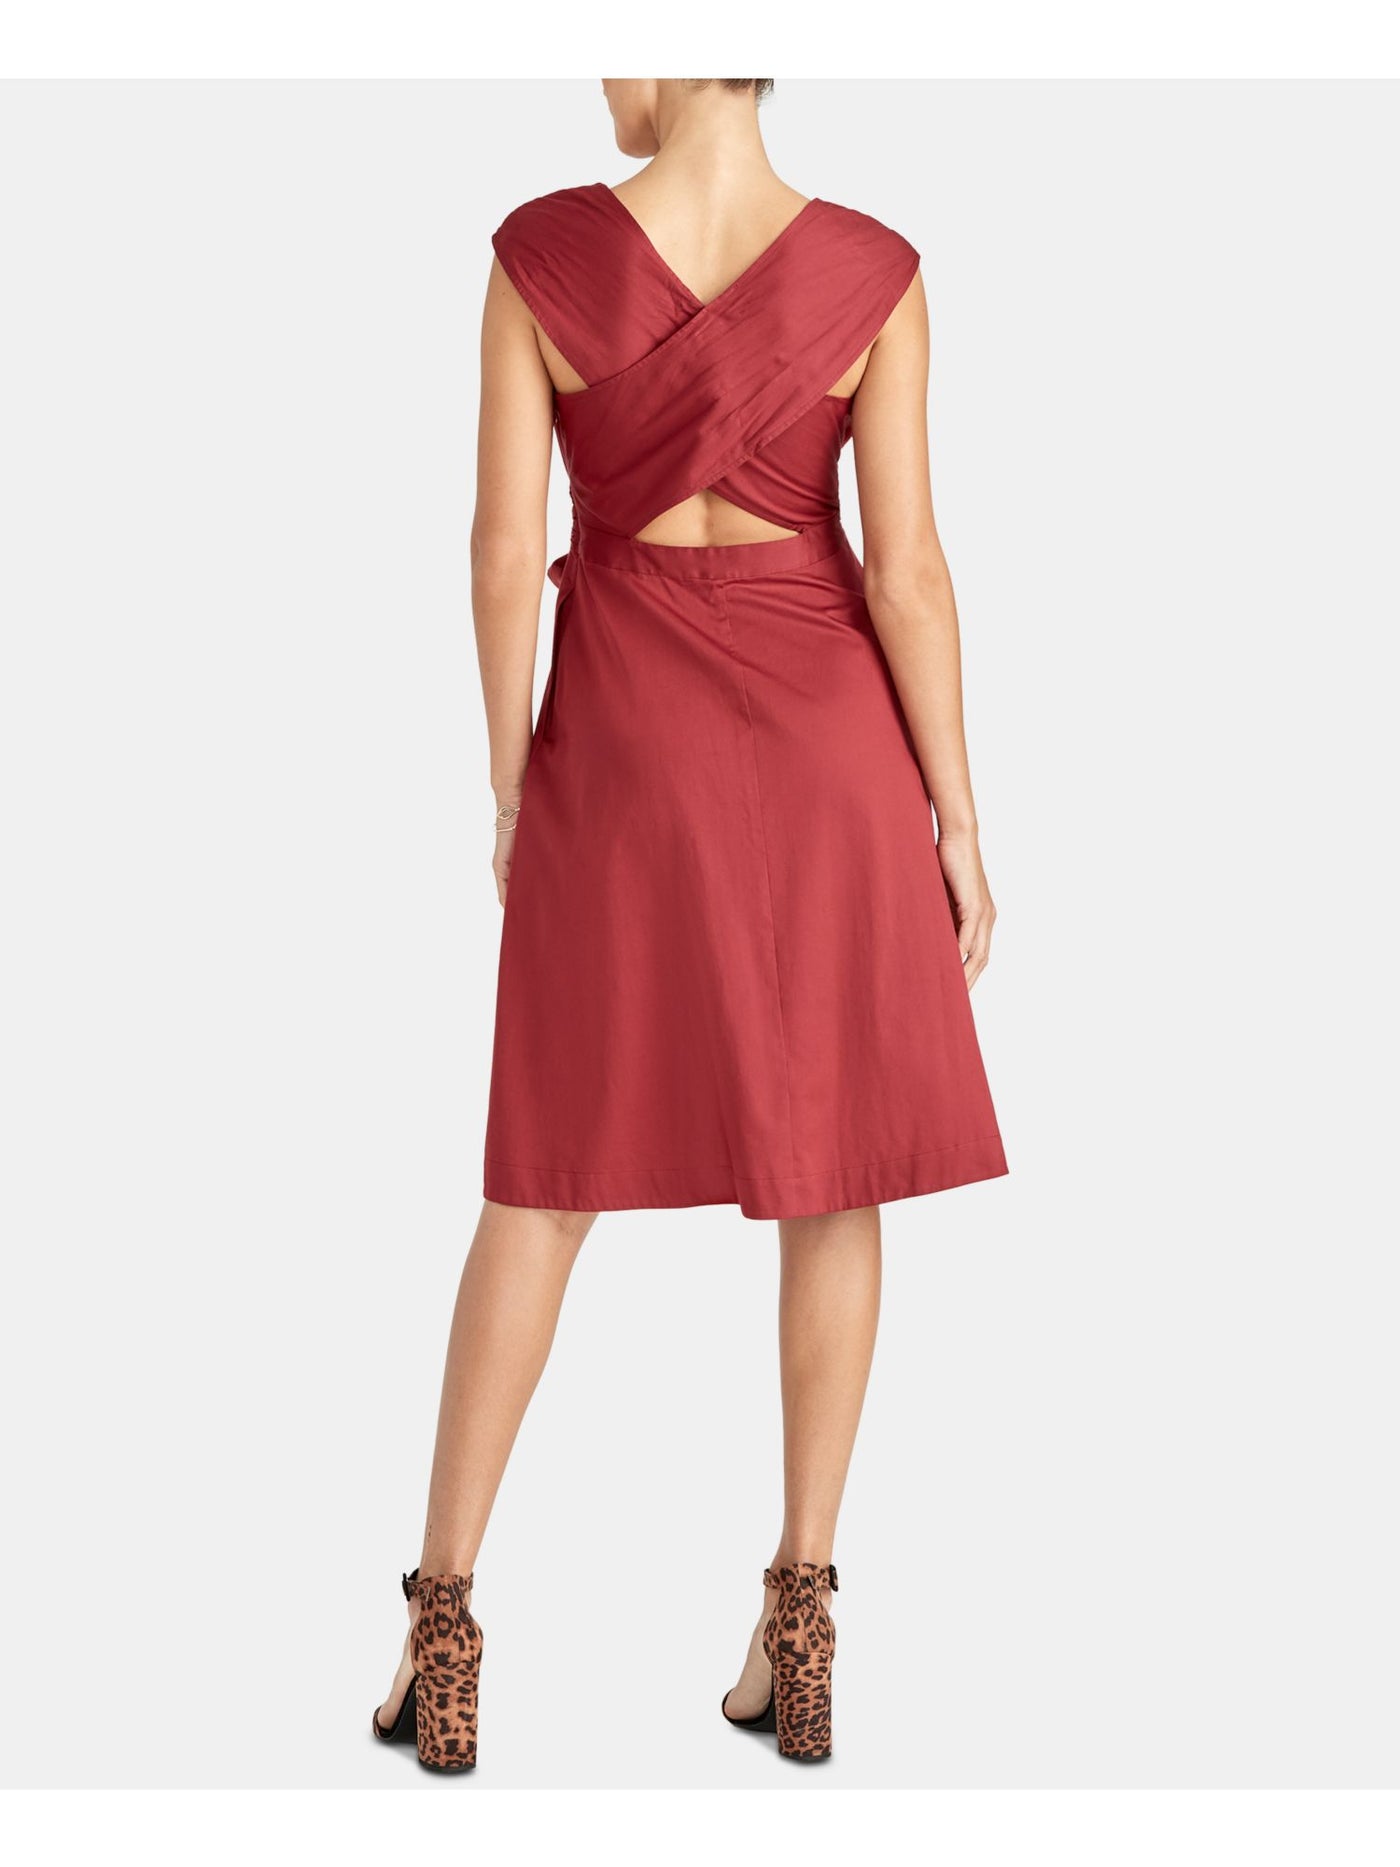 RACHEL ROY Womens Red Belted Sleeveless V Neck Knee Length Wear To Work Fit + Flare Dress 2